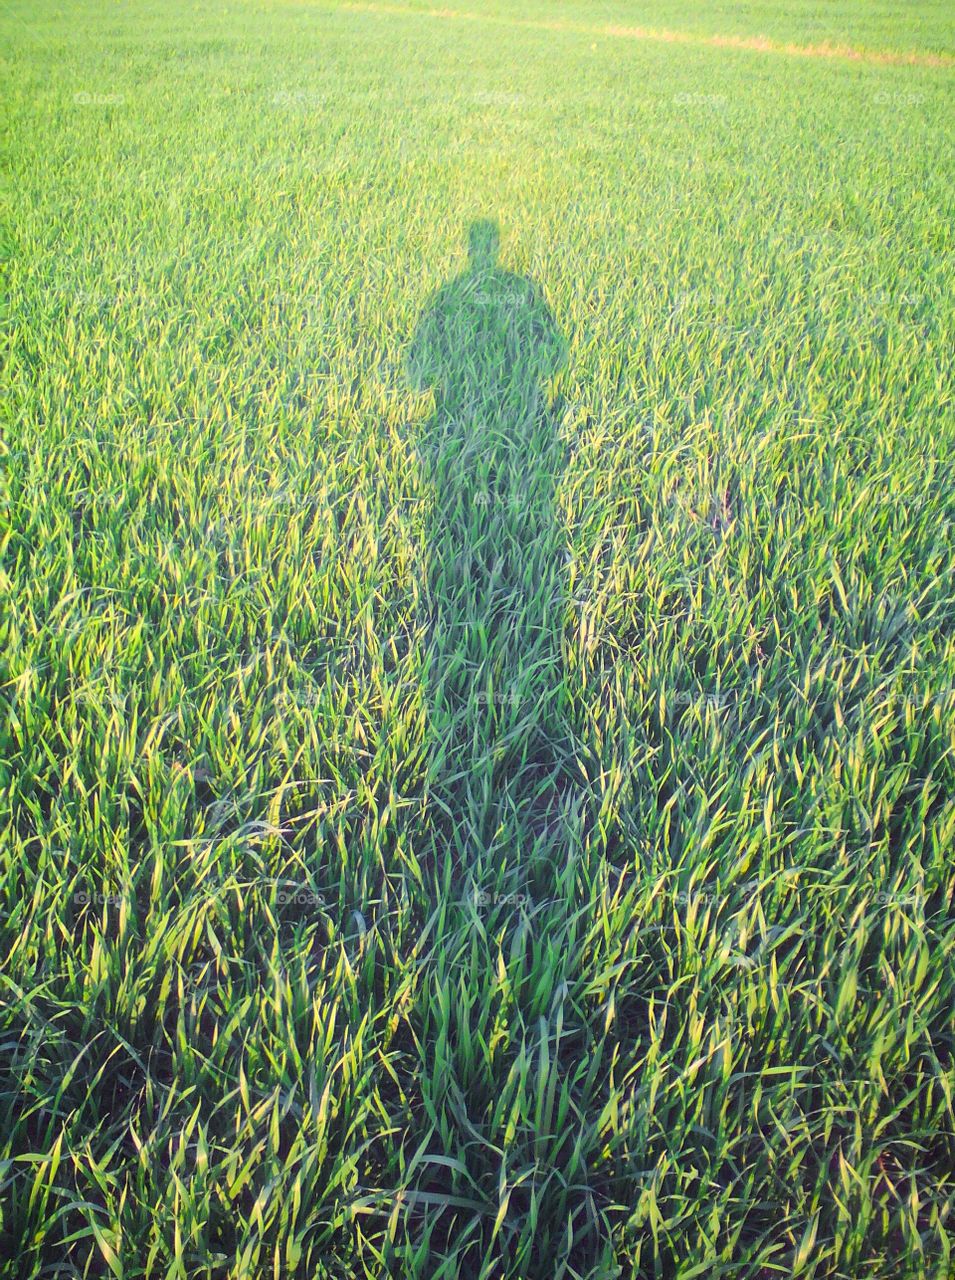 Shadow of a person in a wheat crop field